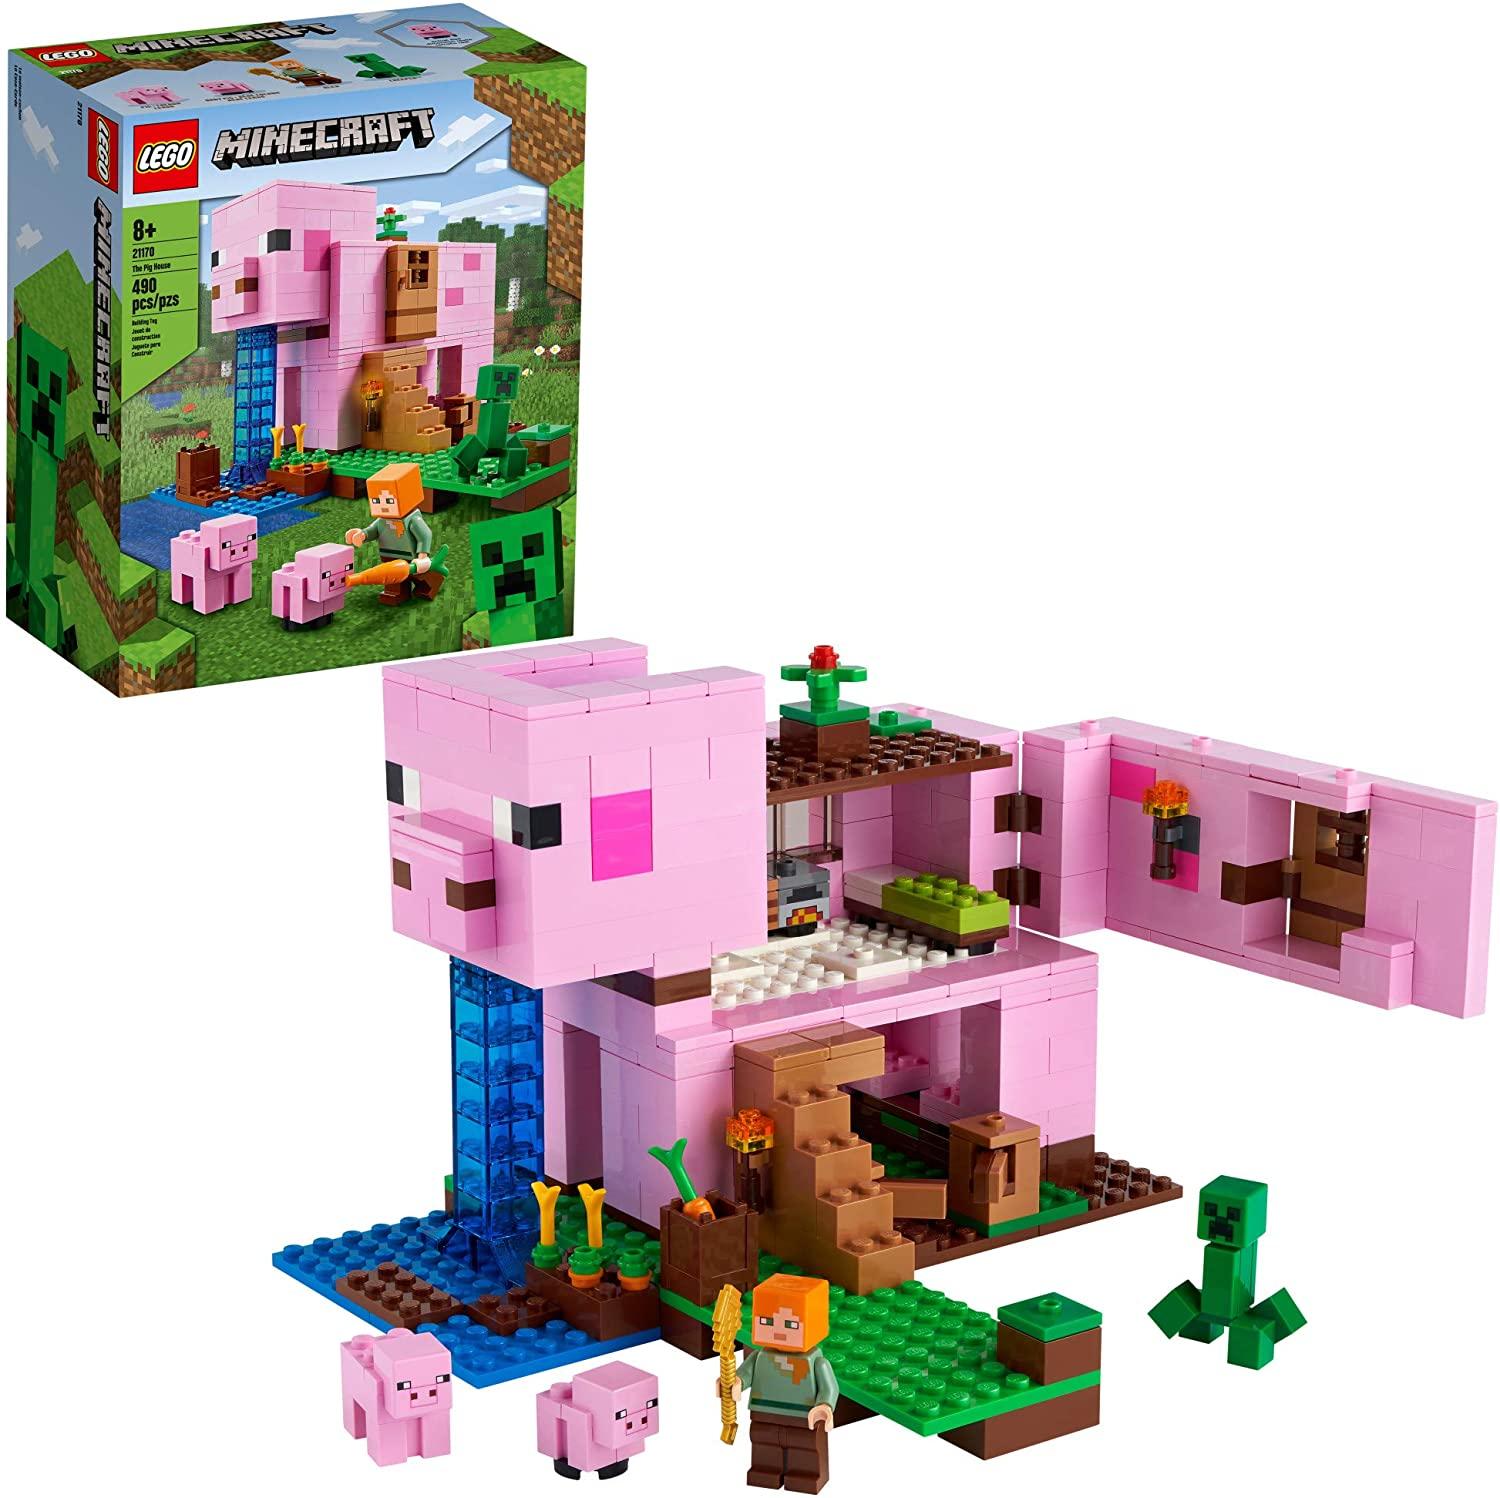 490-Piece Lego Minecraft The Pig House 21170 for $39.99 Shipped